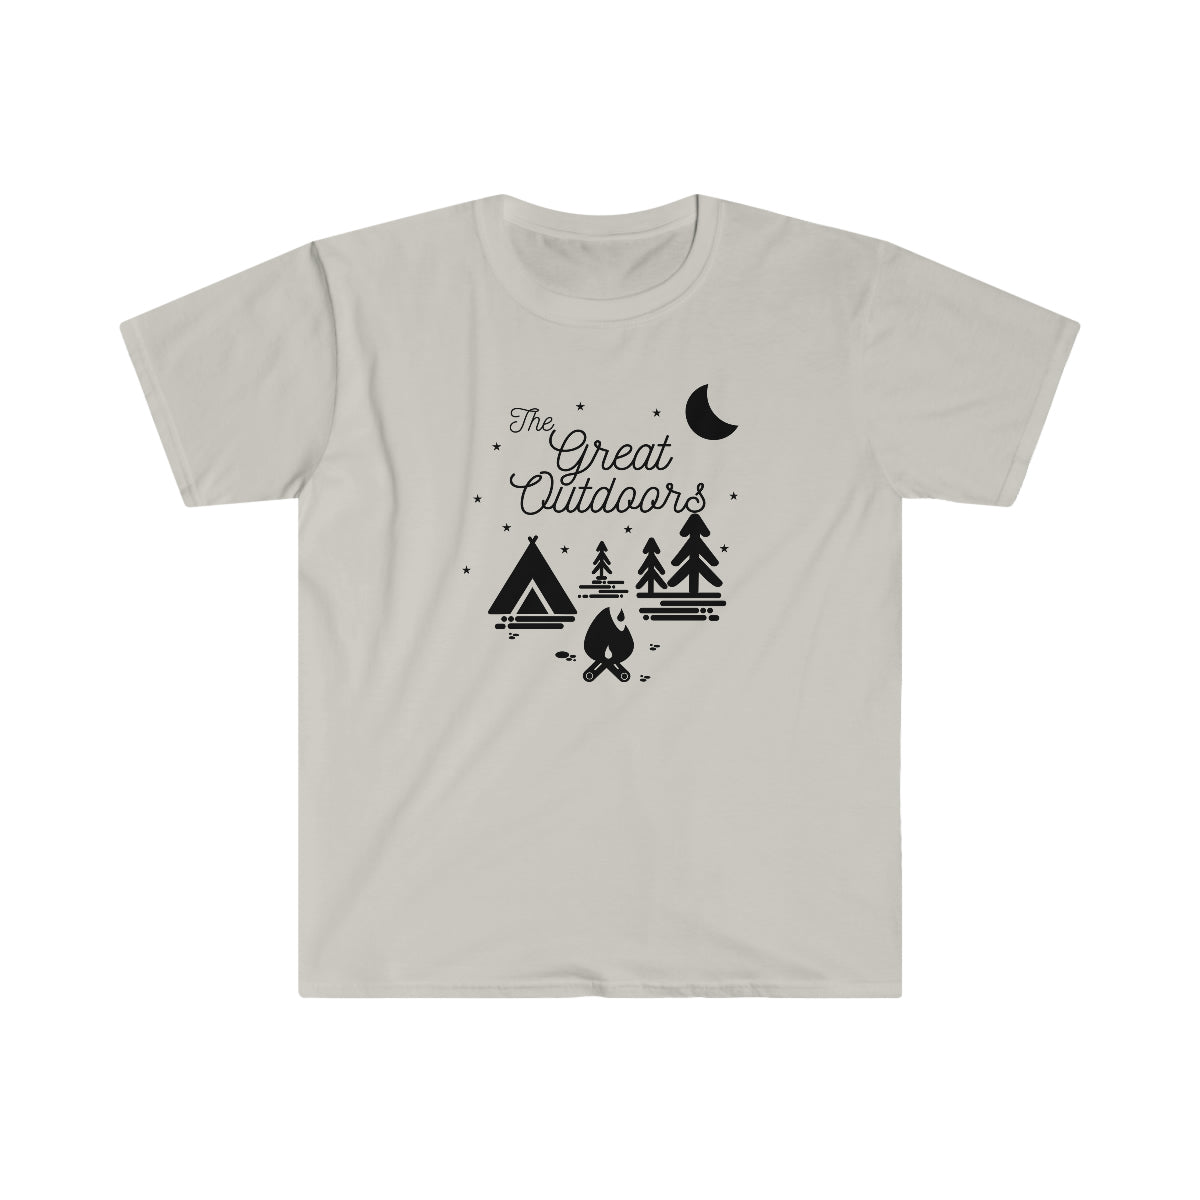 The Great Outdoors - Unisex Softstyle T-Shirt (Gildan 64000)